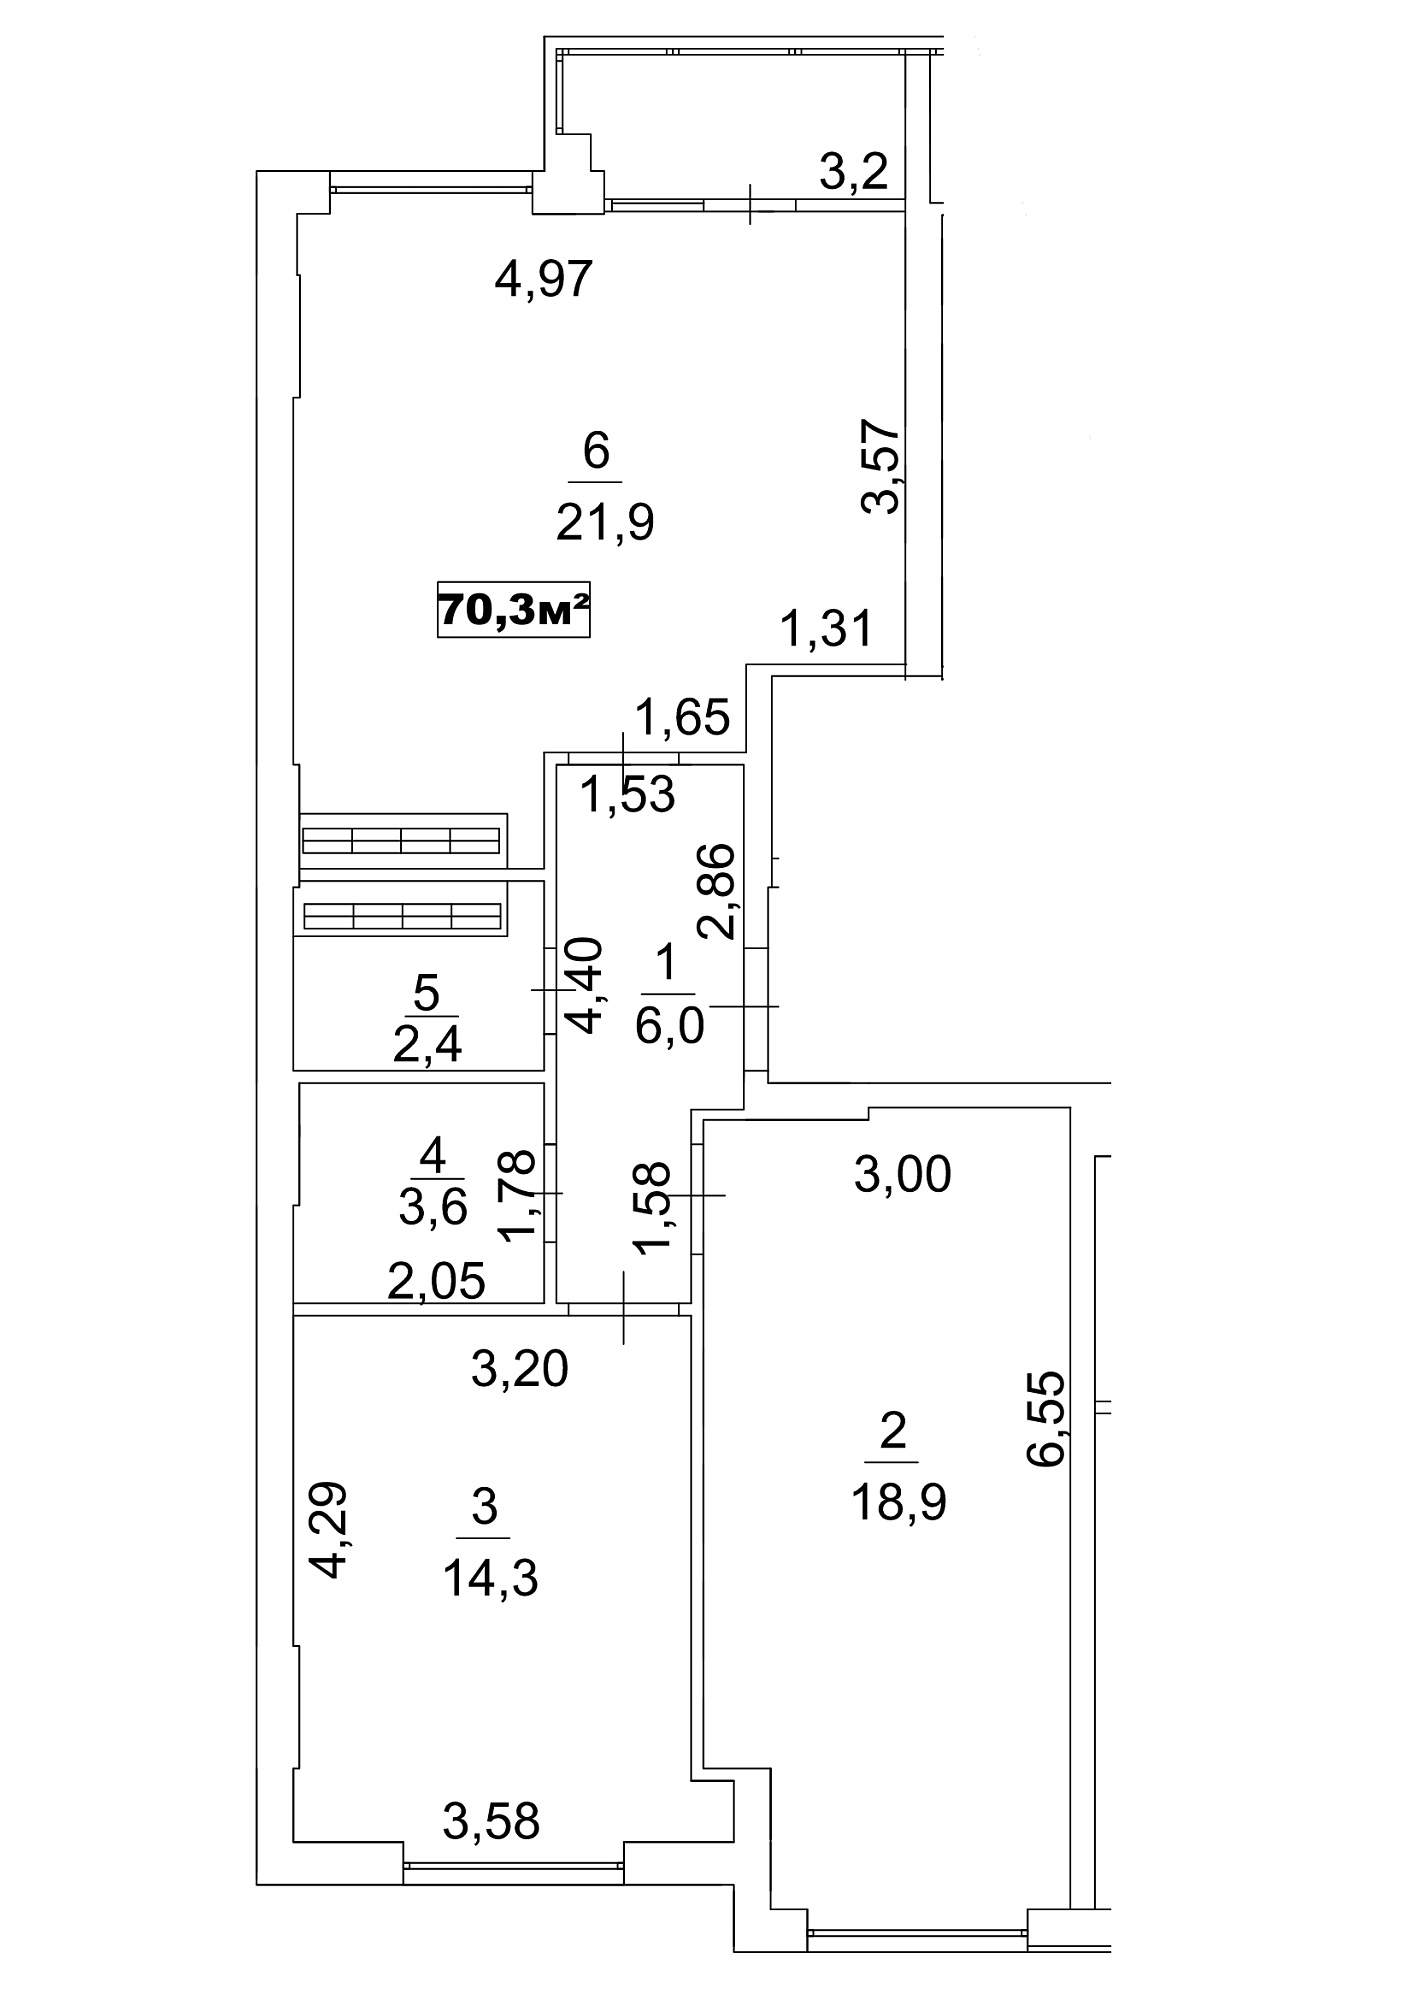 Planning 2-rm flats area 70.3m2, AB-13-03/0018а.